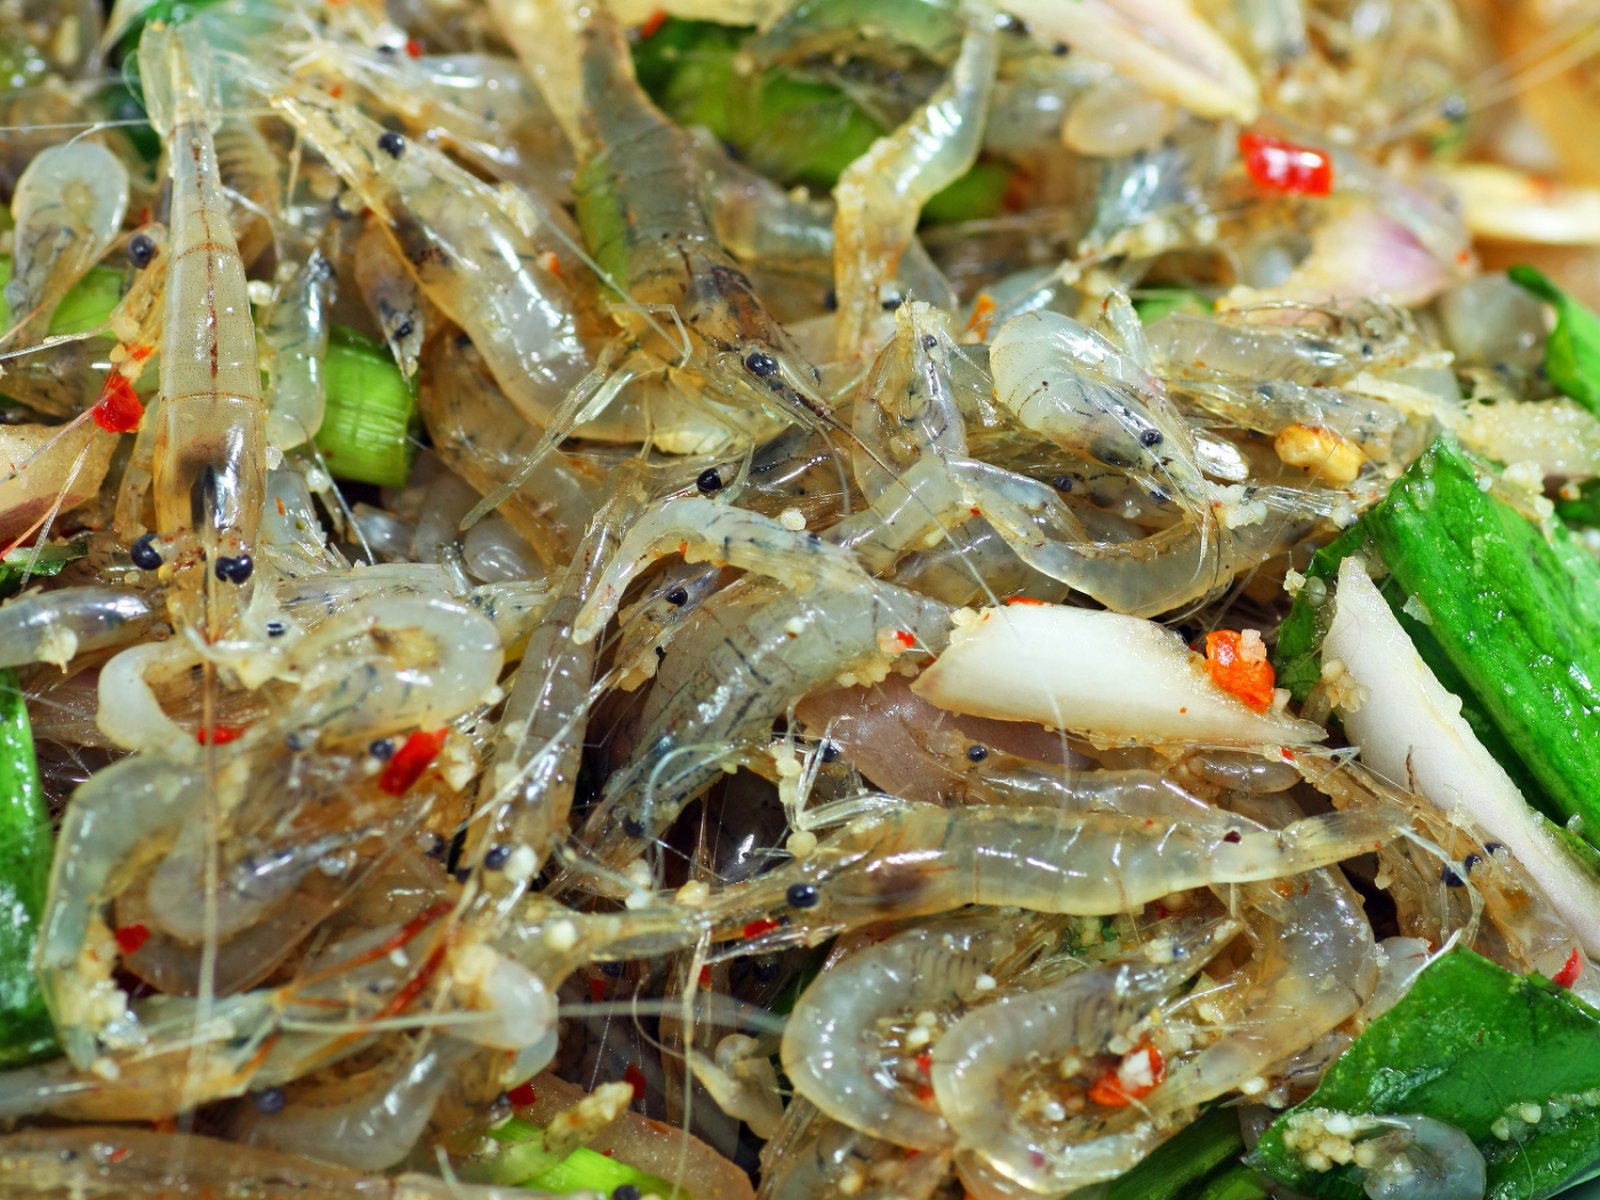 How to try eating dancing shrimp in Pattaya